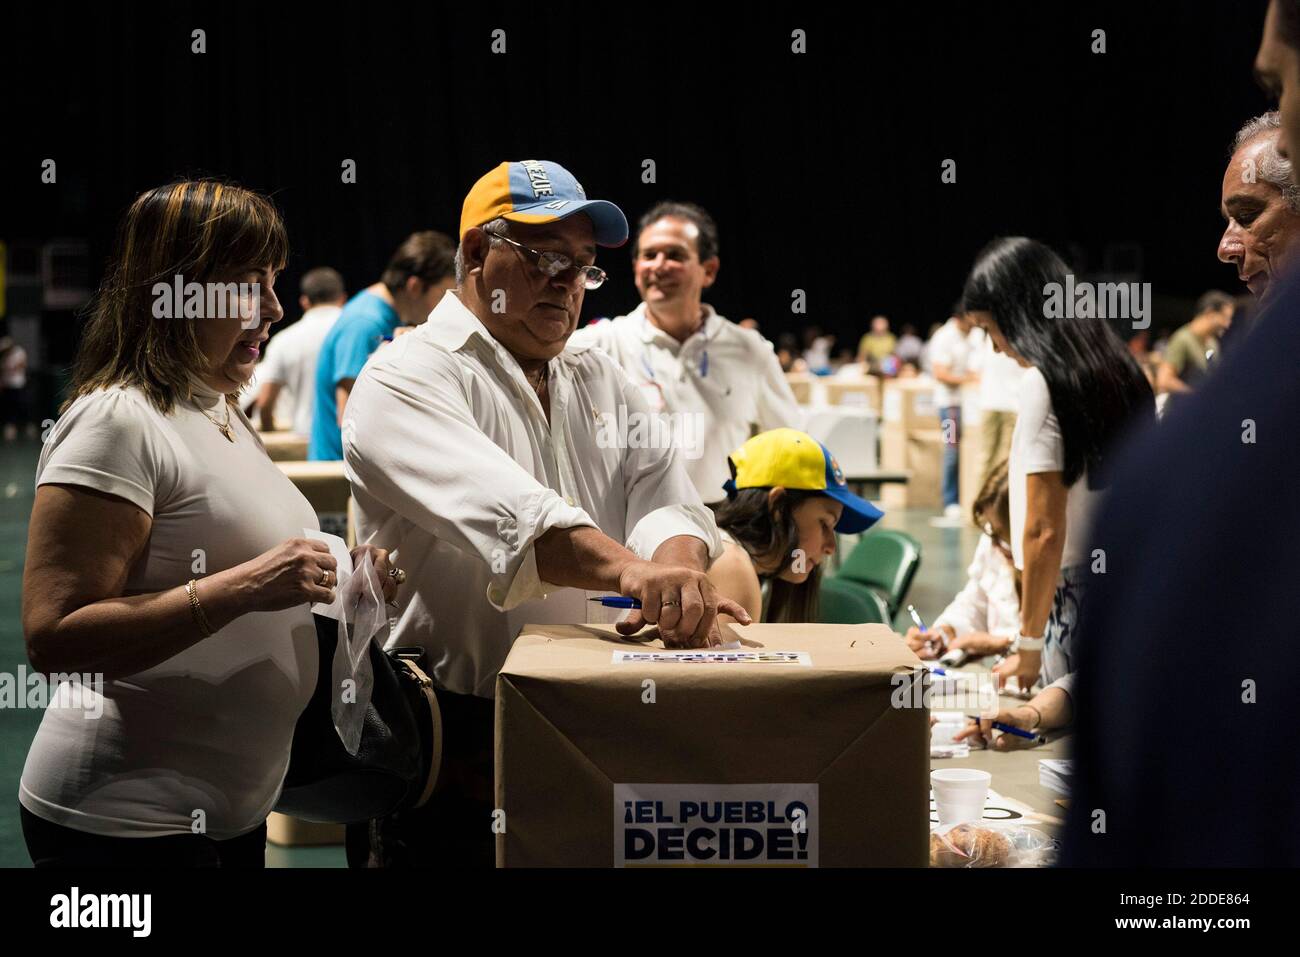 NO FILM, NO VIDEO, NO TV, NO DOCUMENTARY - Eddison Heredia submits his vote in the Venezuelan referendum at the Watsco Center in Coral Gables on Sunday, July 16, 2017. Photo by Bryan Cereijo/Miami Herald/TNS/ABACAPRESS.COM Stock Photo